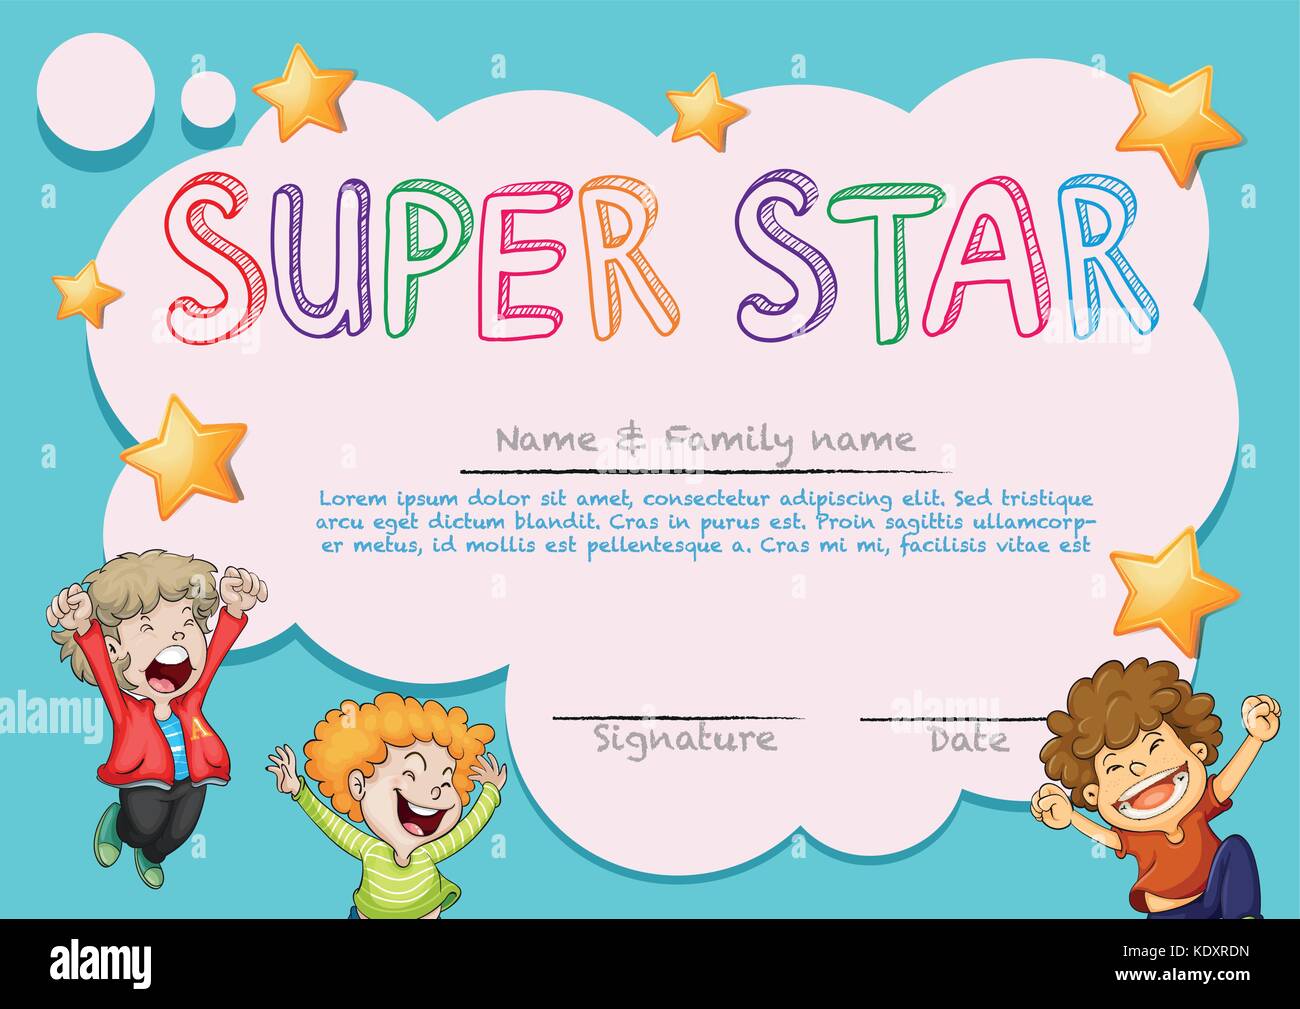 Super star award template with kids in background illustration Stock ...